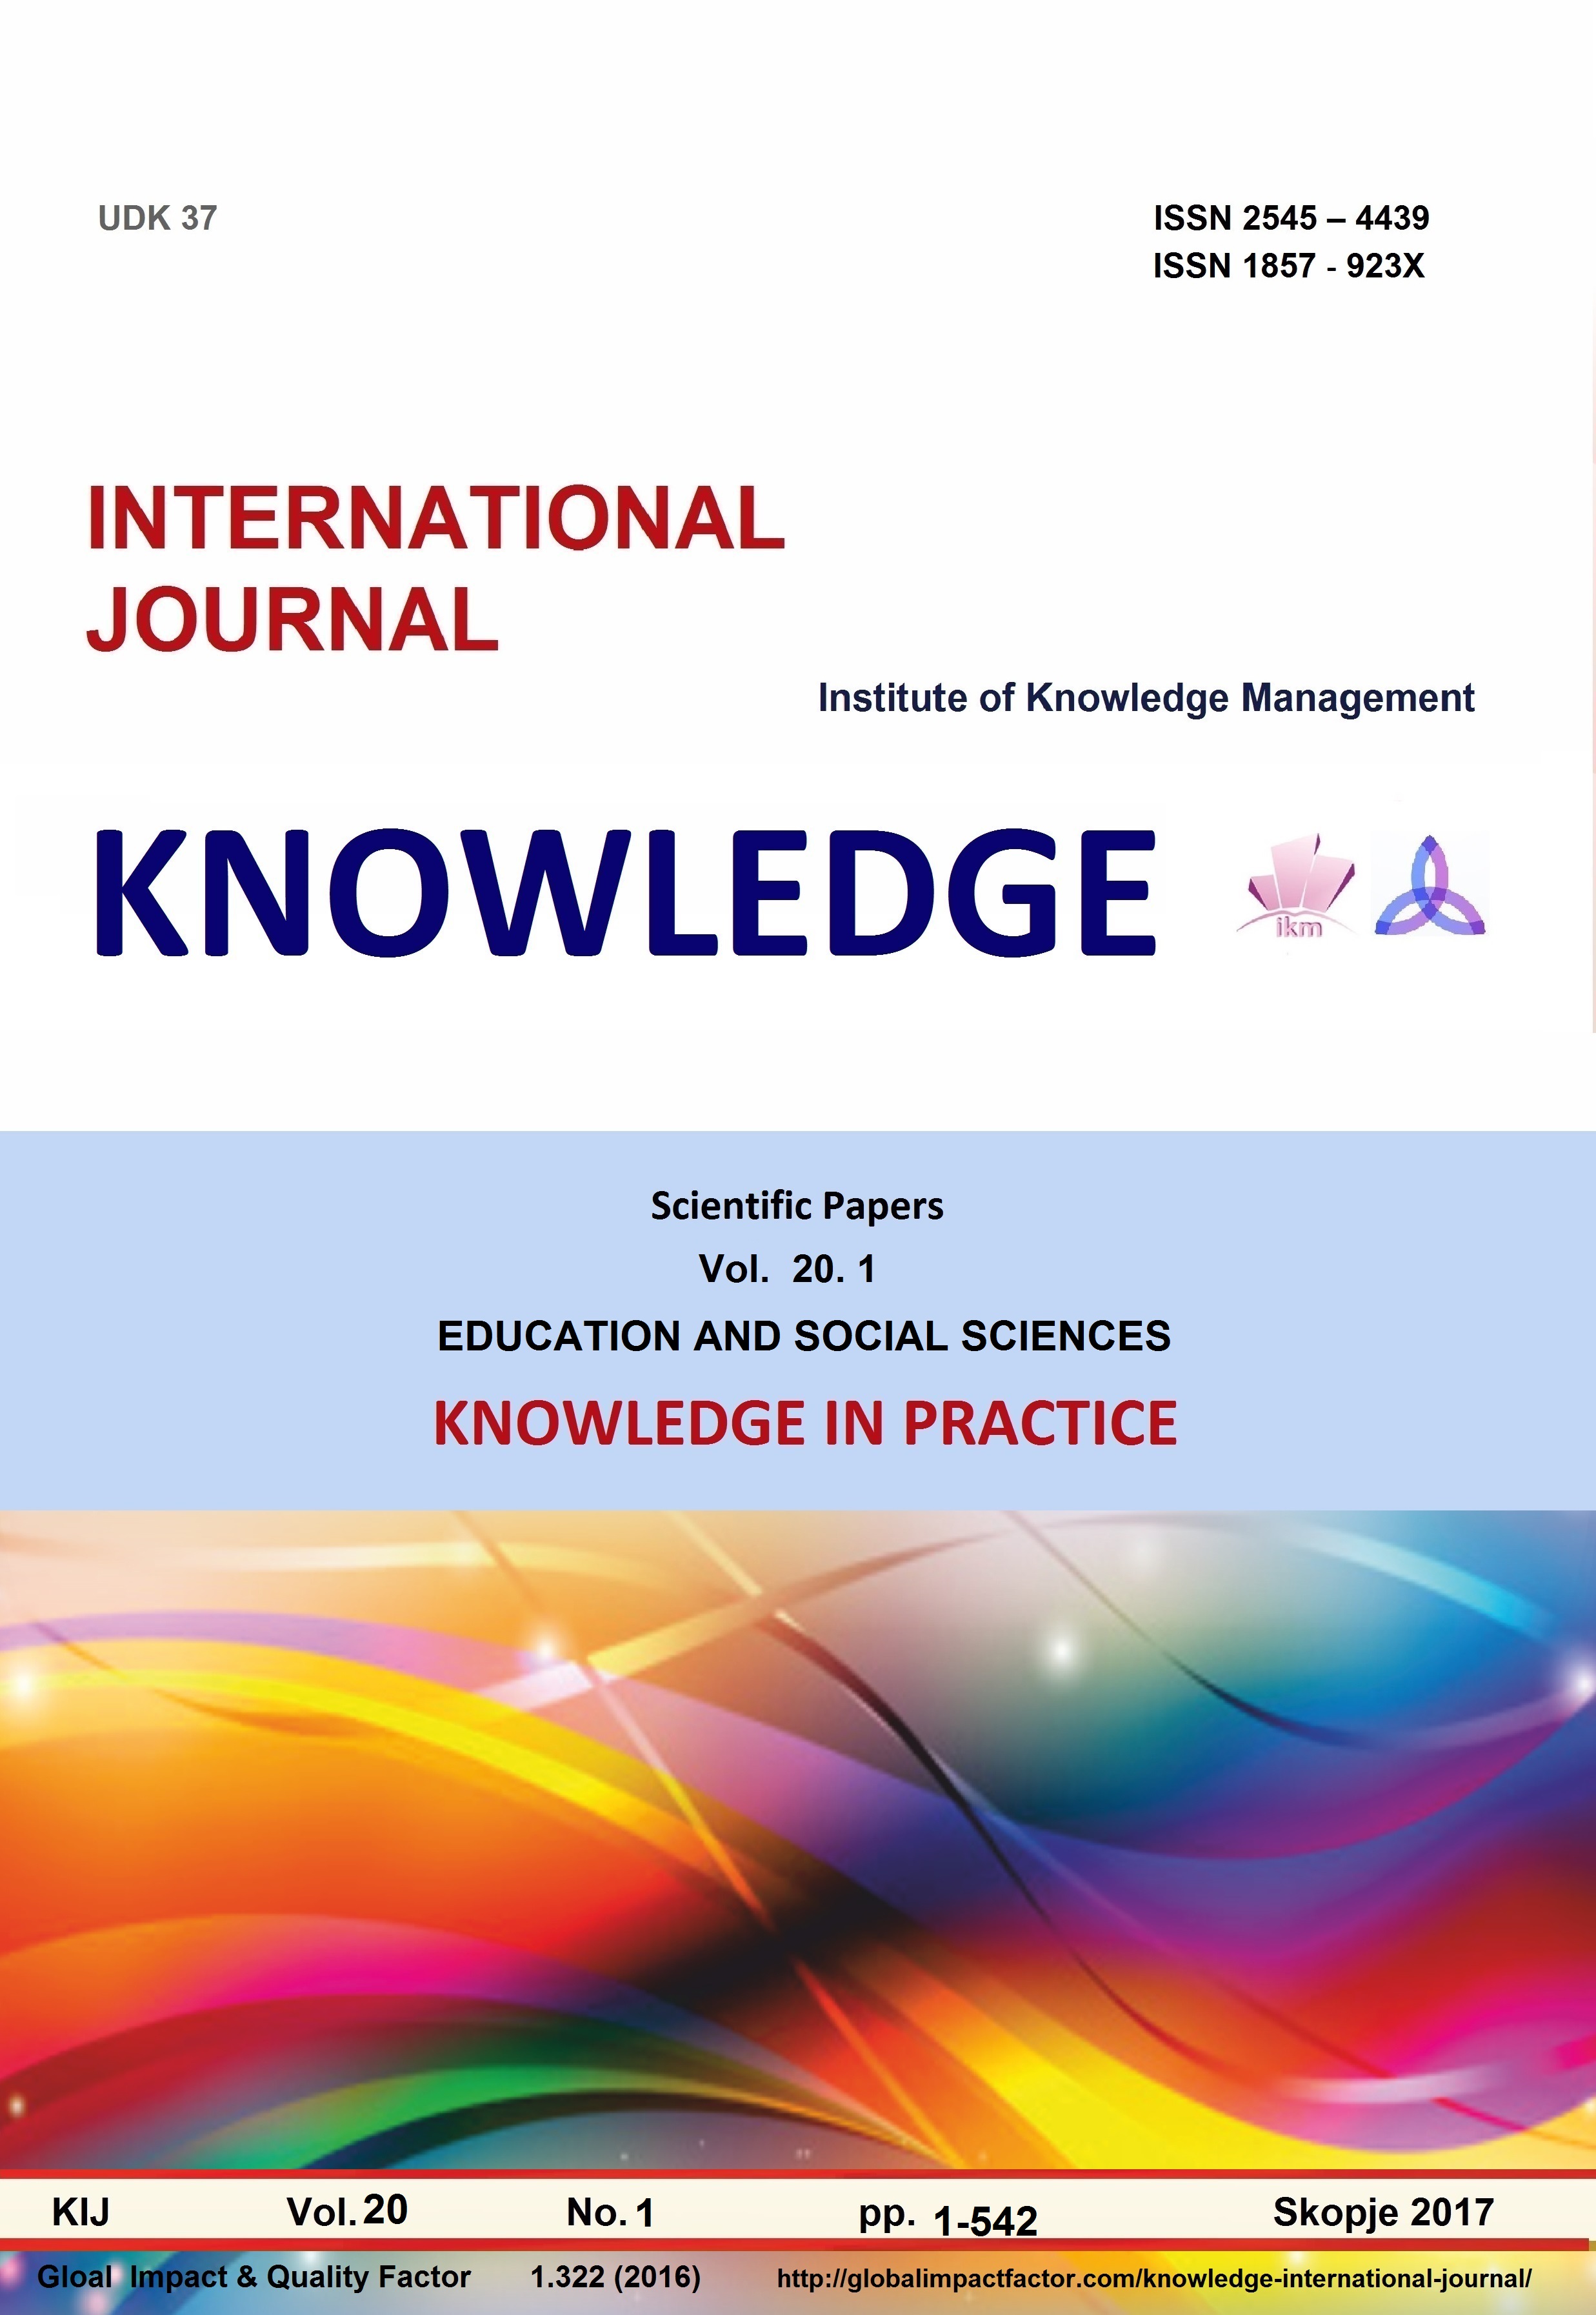 					View Vol. 20 No. 1 (2017): Knowledge in practice
				